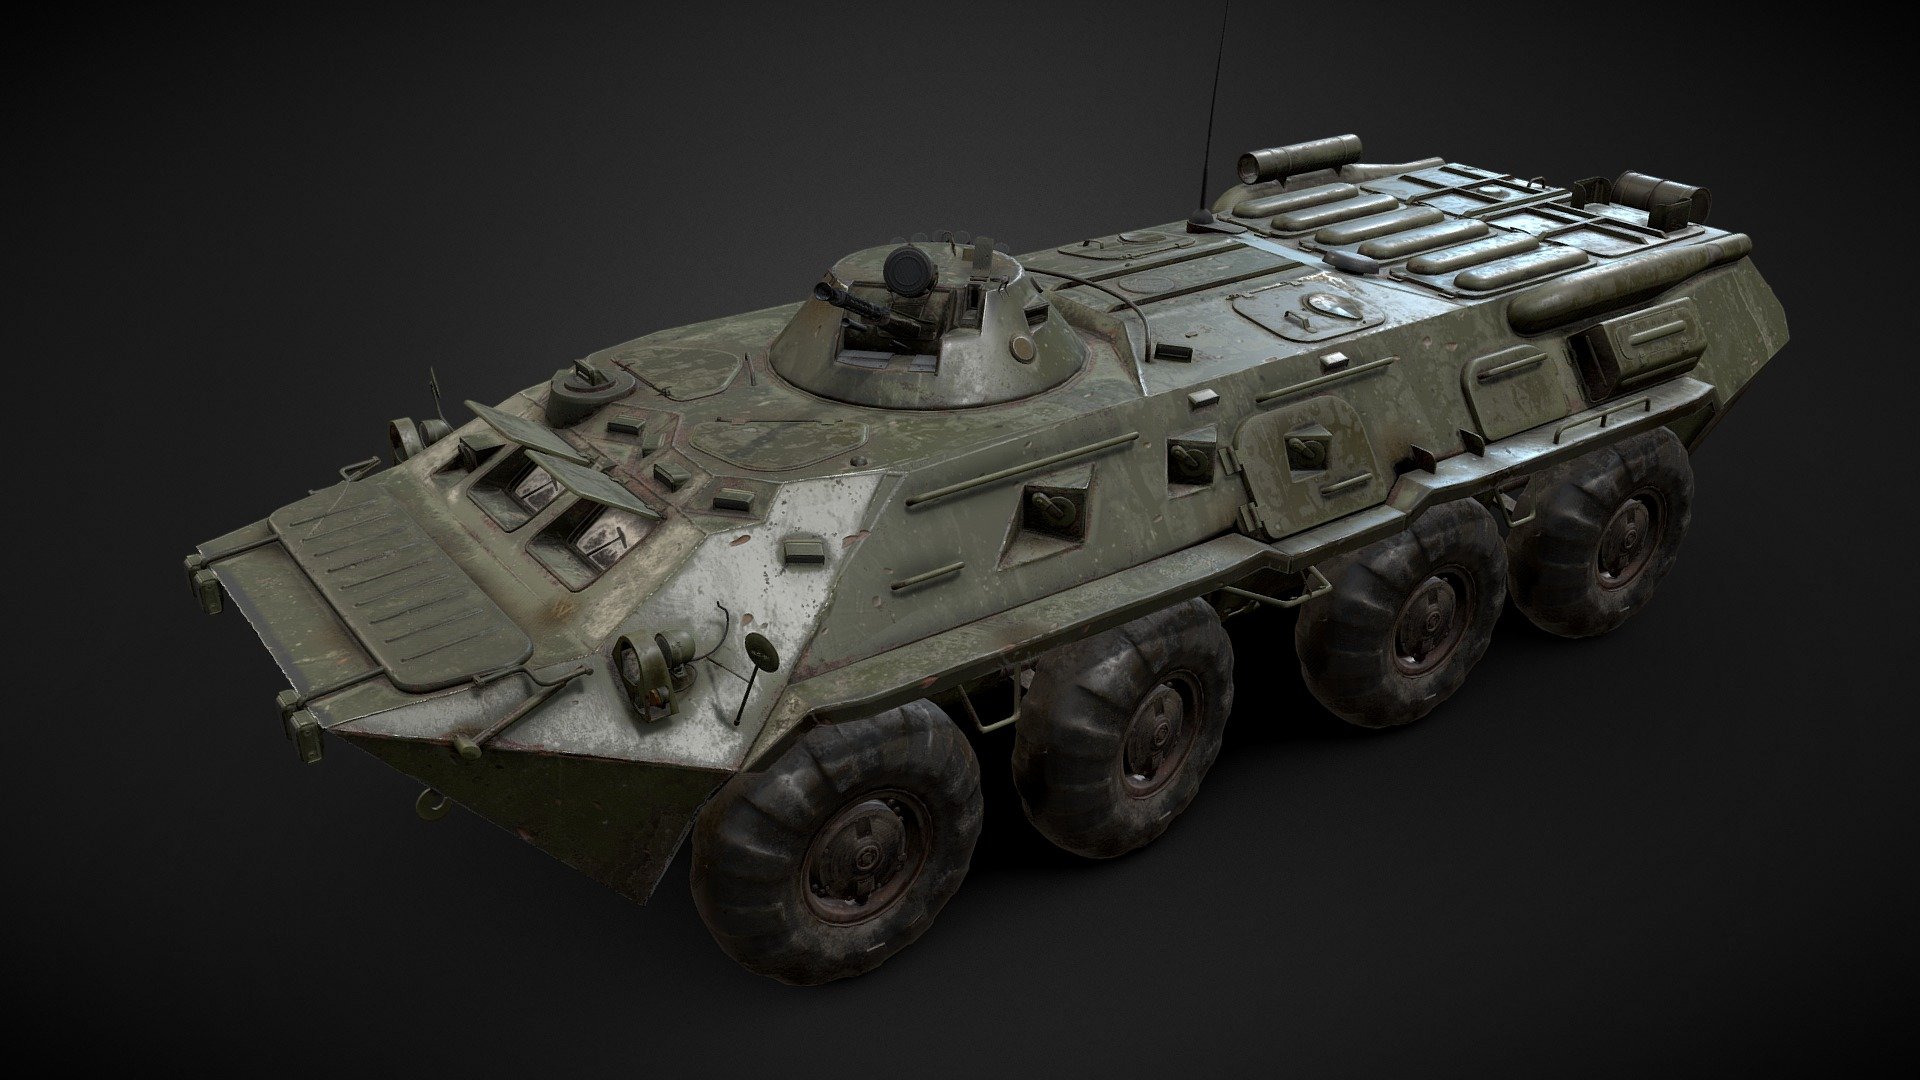 A soviet era armoured personnel carrier, the BTR 80. Now, a relic of the past.

Made in Blender, Textured in Substance Painter :]

Gameready asset, perfect for games and projects 3d model